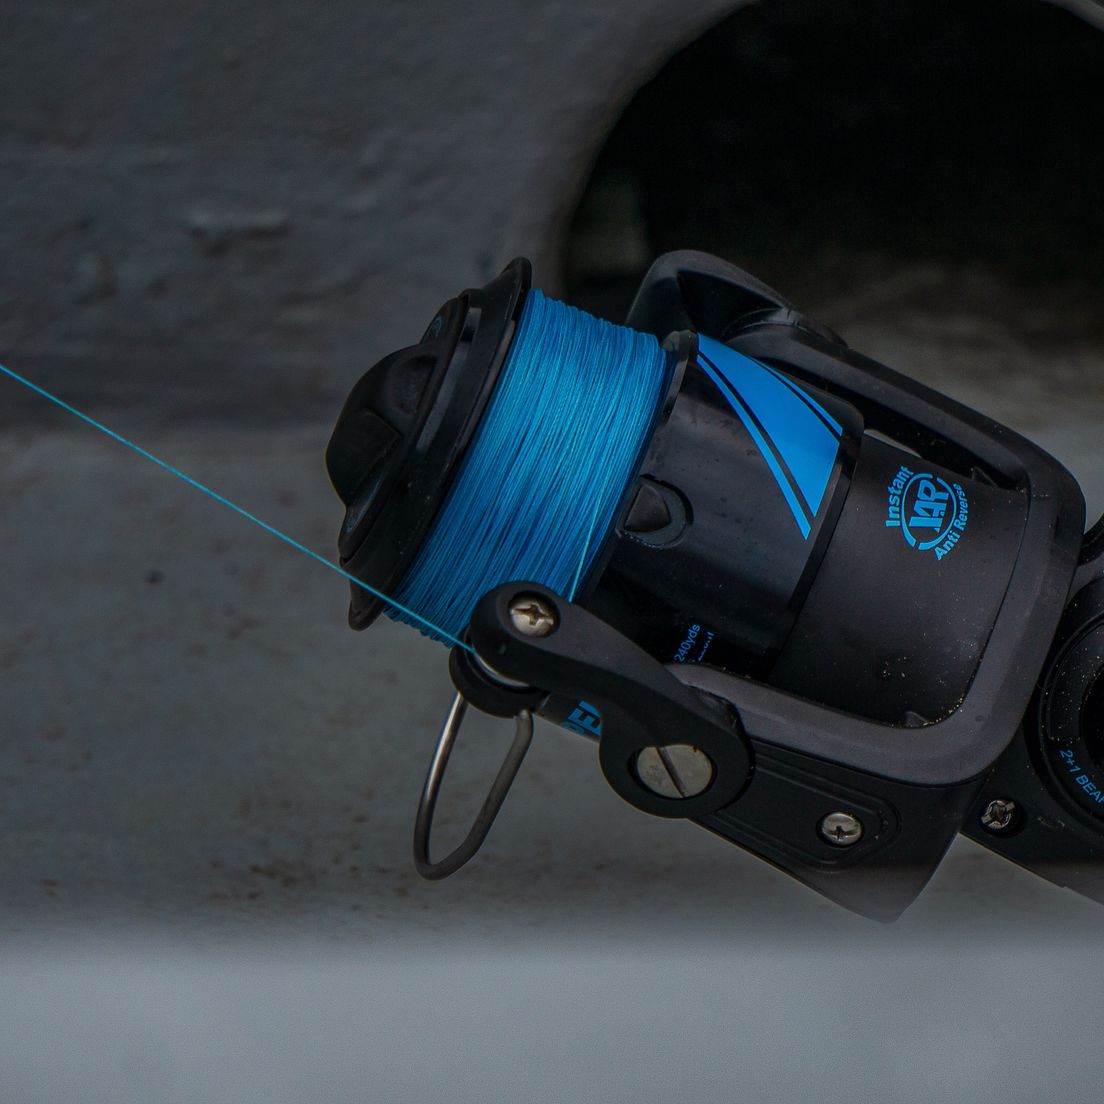 The importance of the right fishing reel: selection and care